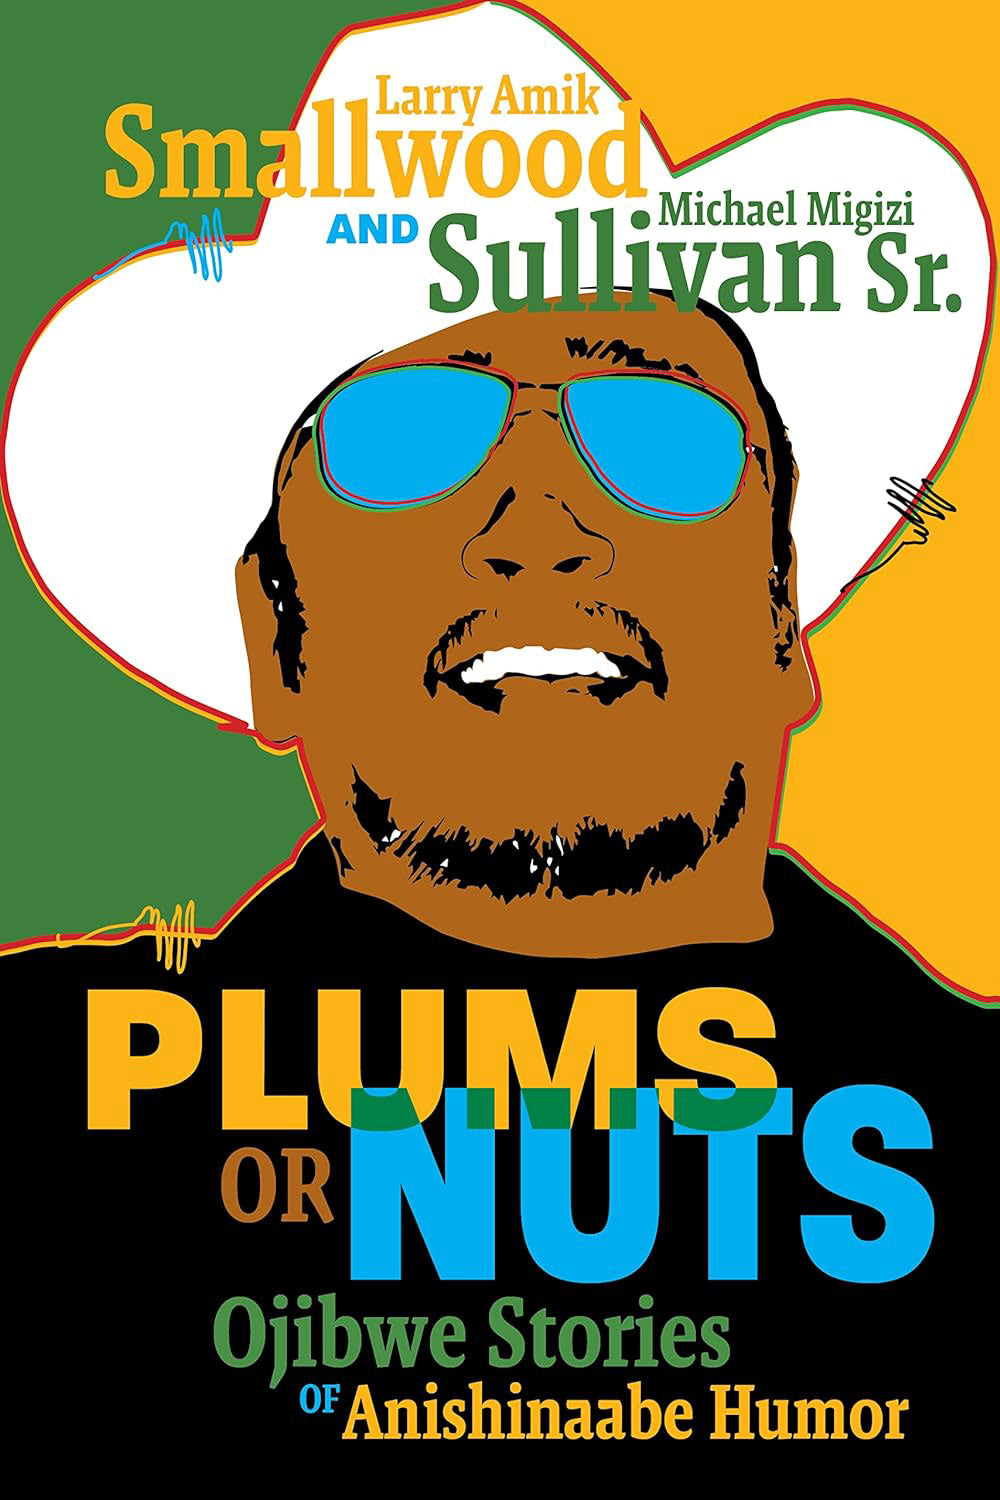 Plums or Nuts: Ojibwe Stories of Anishinaabe Humor by Larry Amik Smallwood